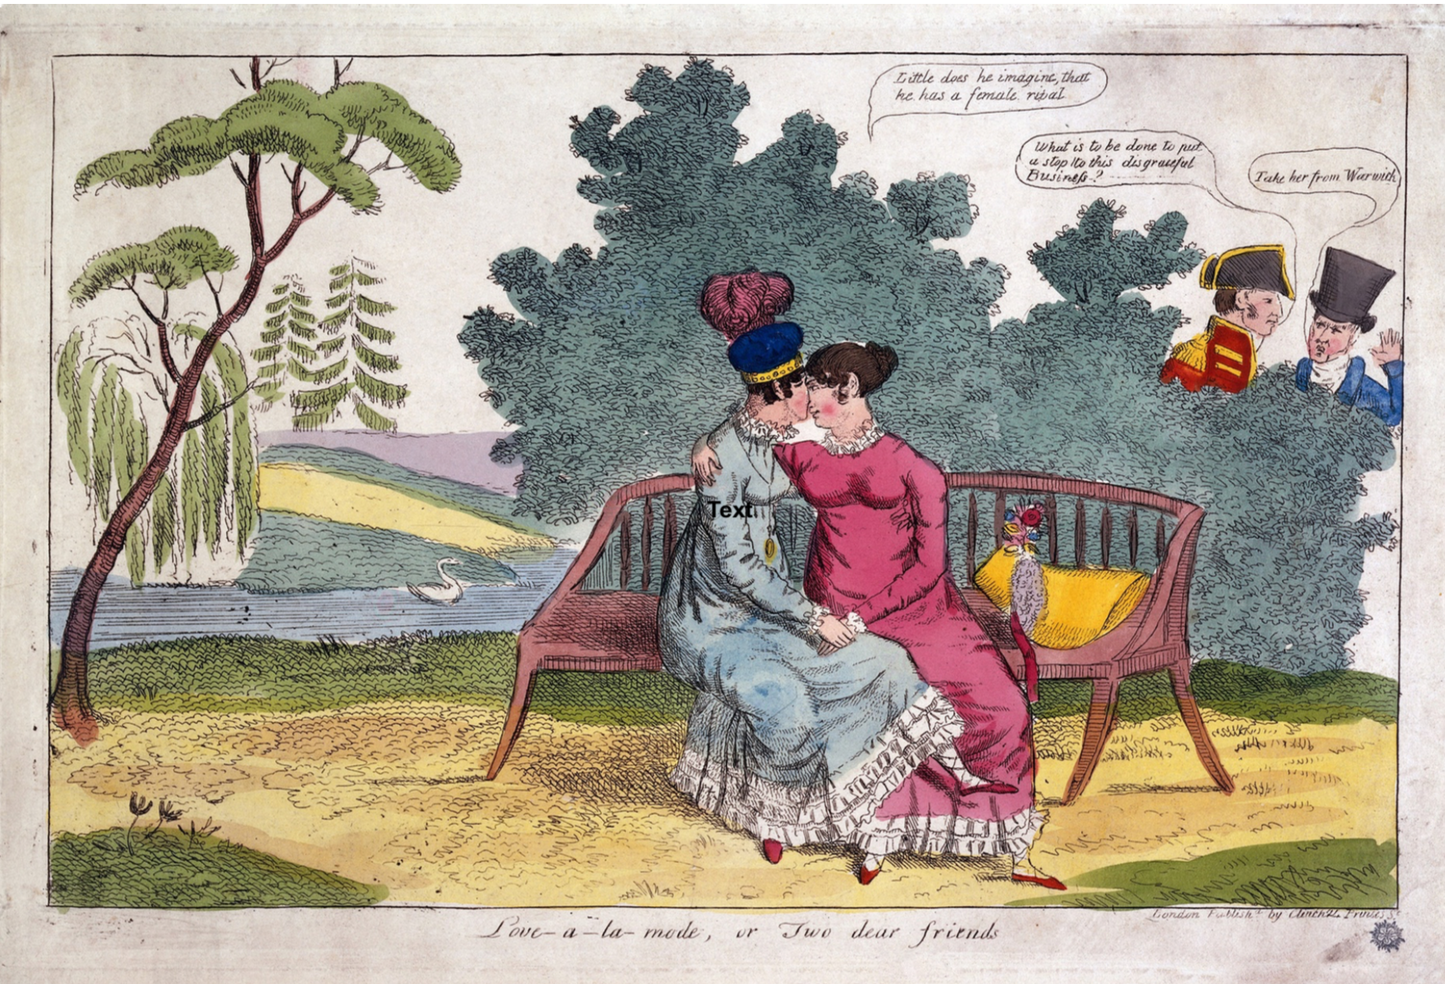 Lady Strachan and Lady Warwick making love in a park, while their husbands look on with disapproval. Coloured etching, c. 1820 - Postcard